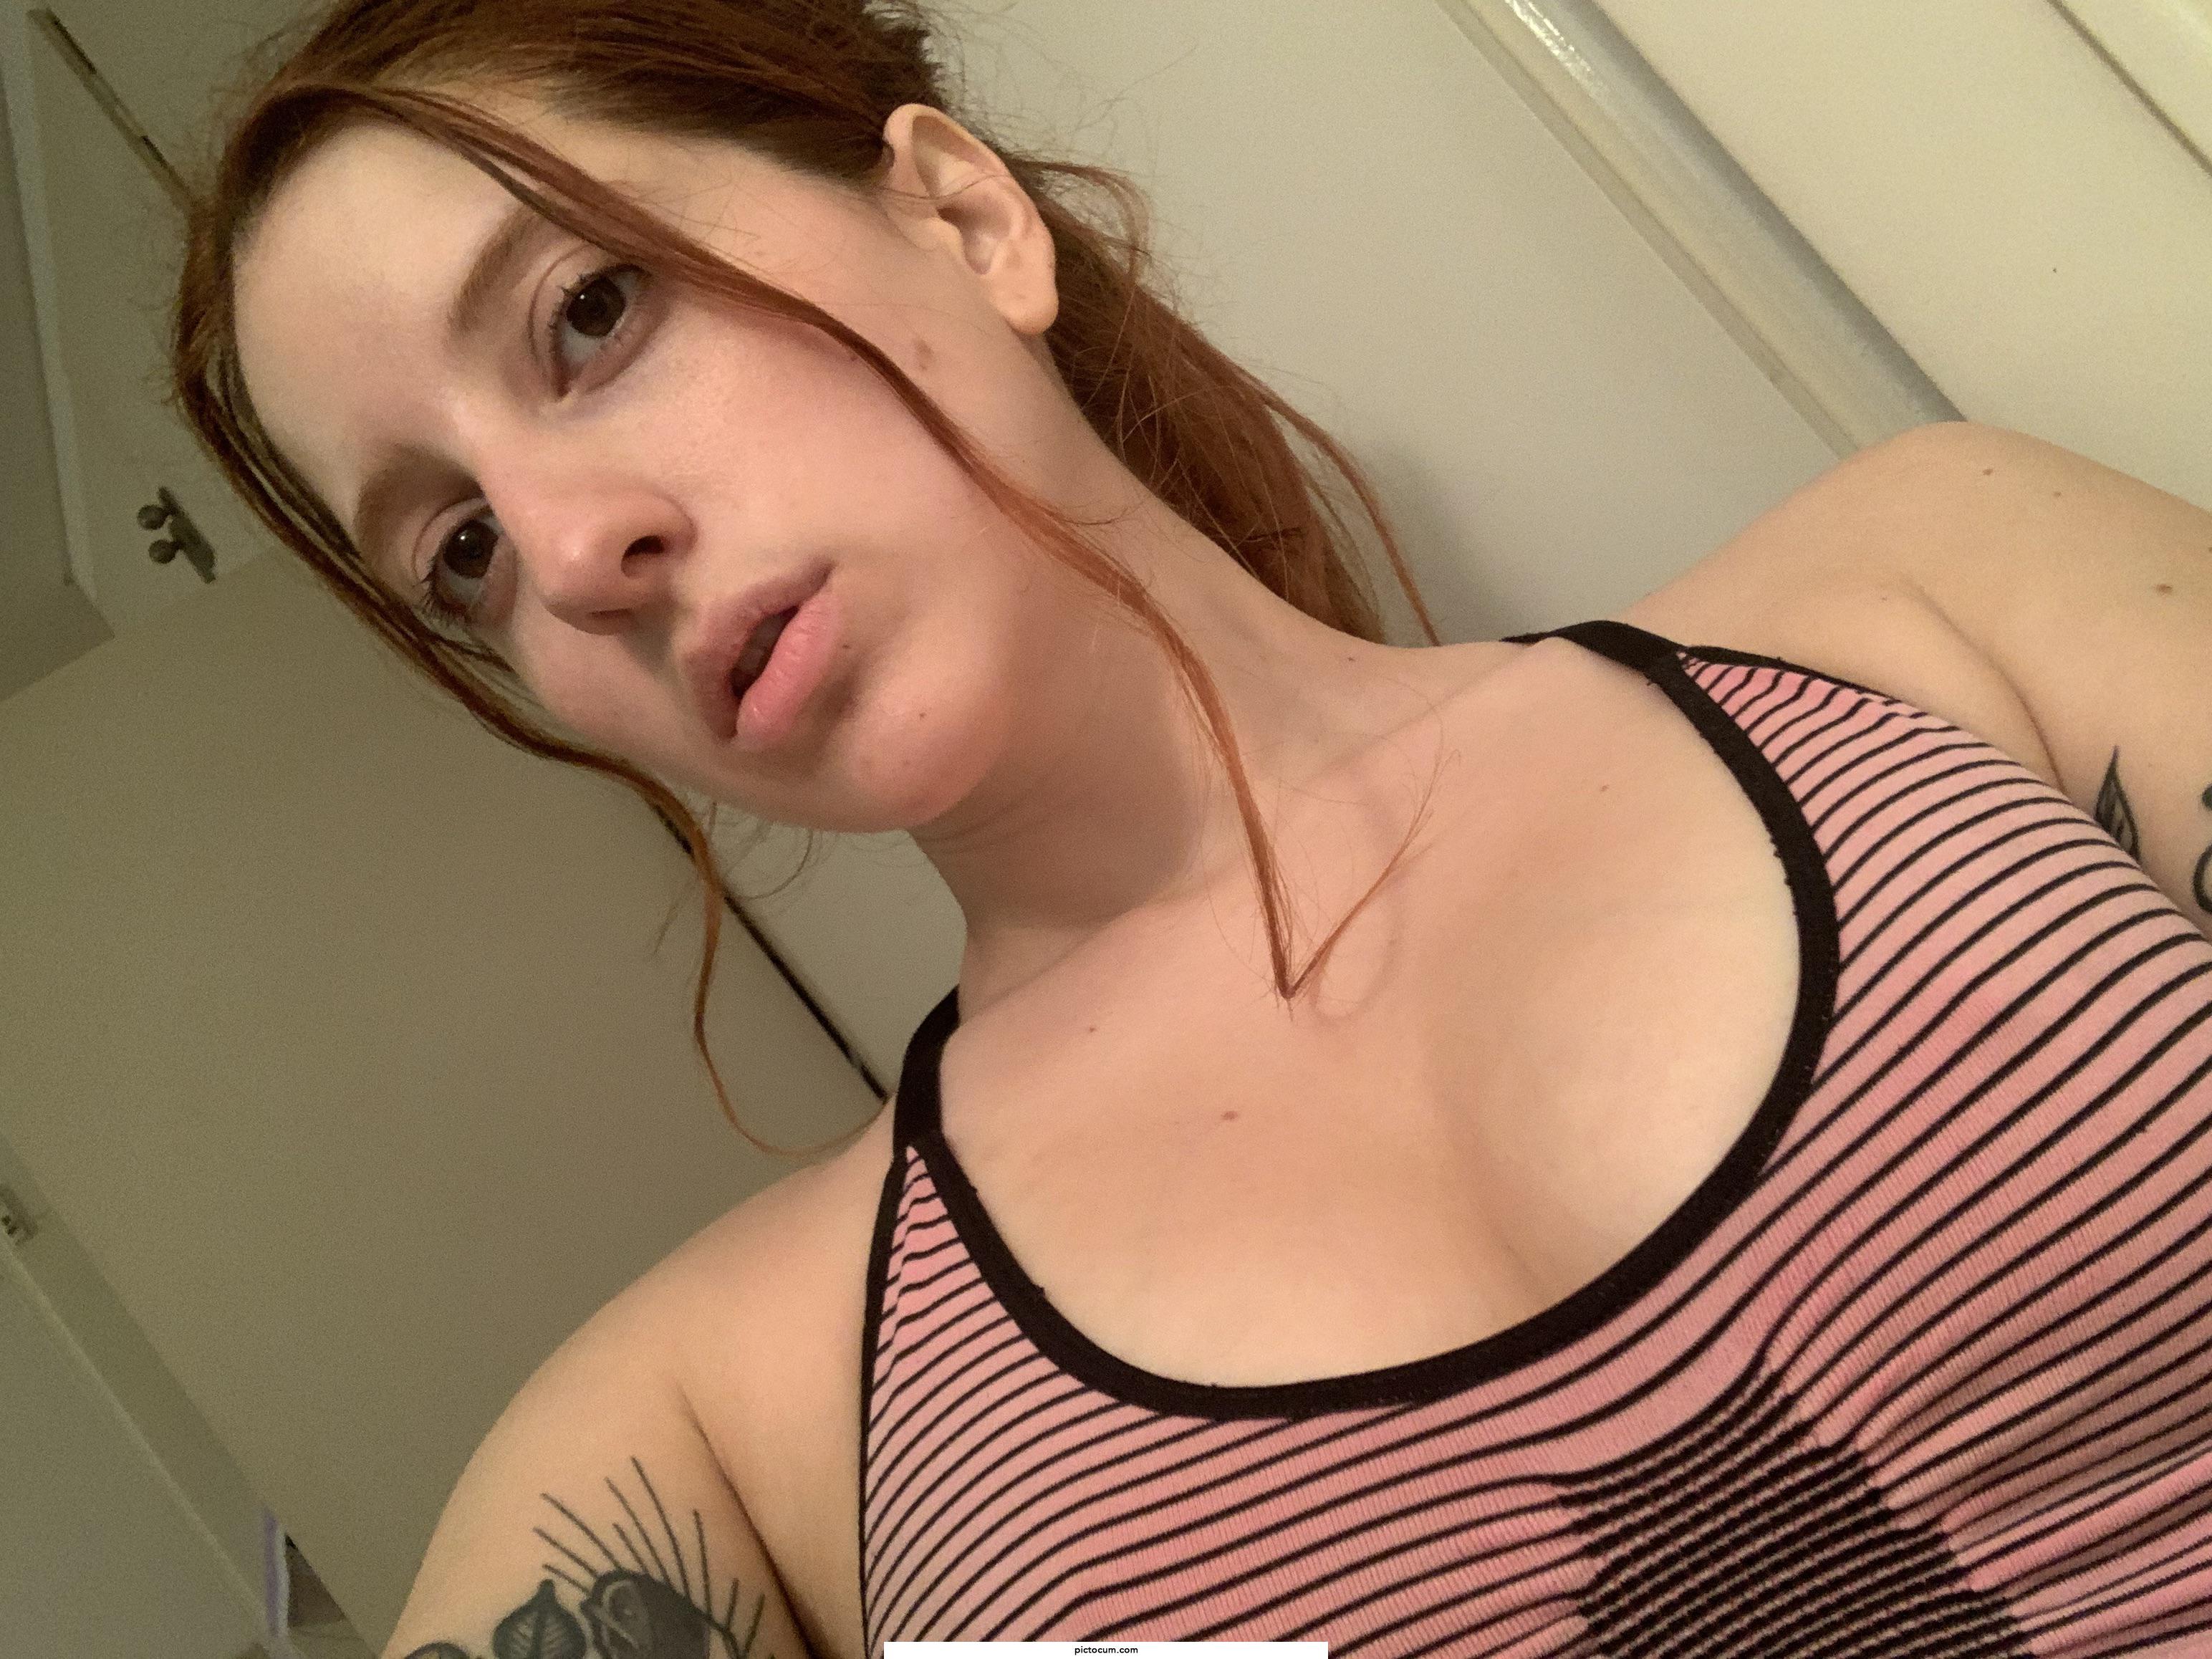 I’m so sweaty and red after working out 🥵